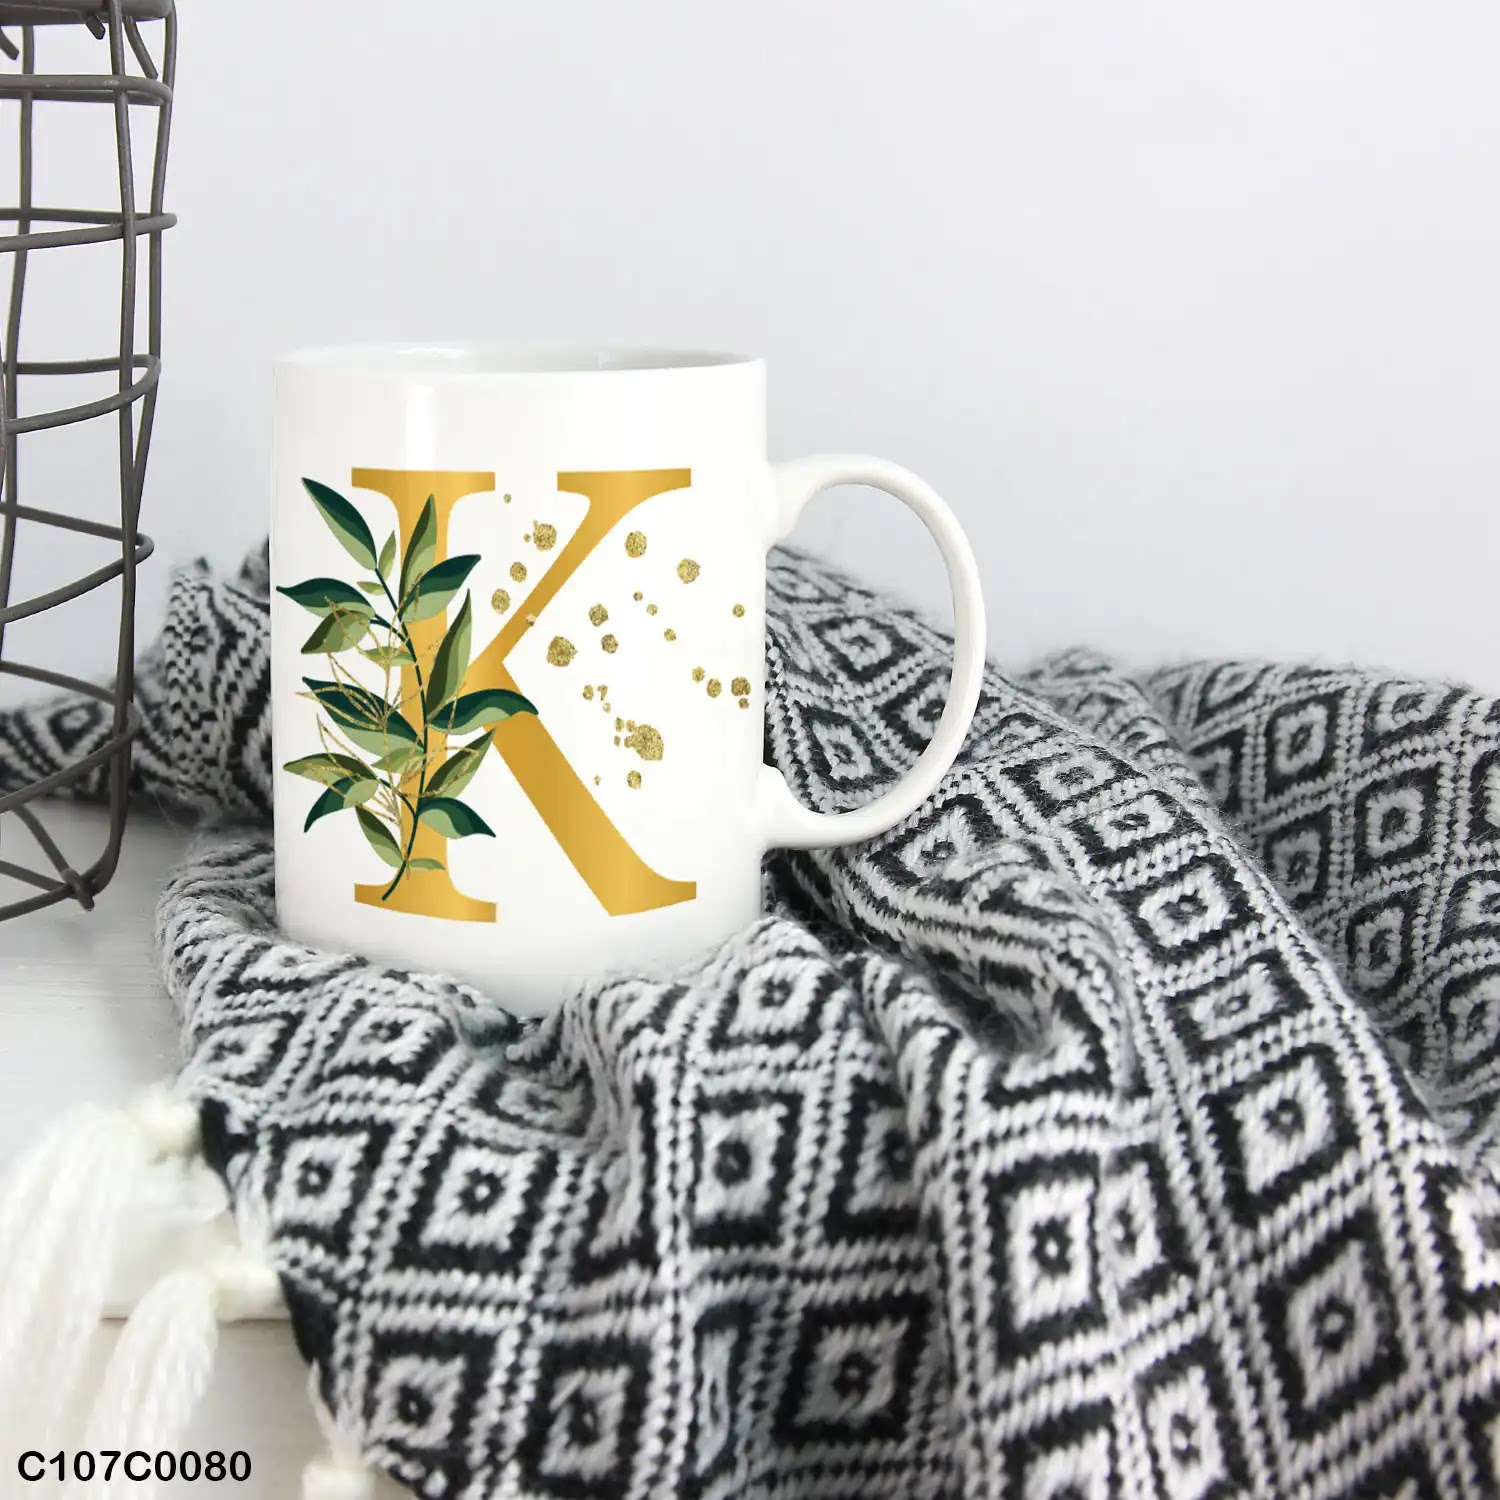 A white mug (cup) printed with gold Letter "K" and small green branch